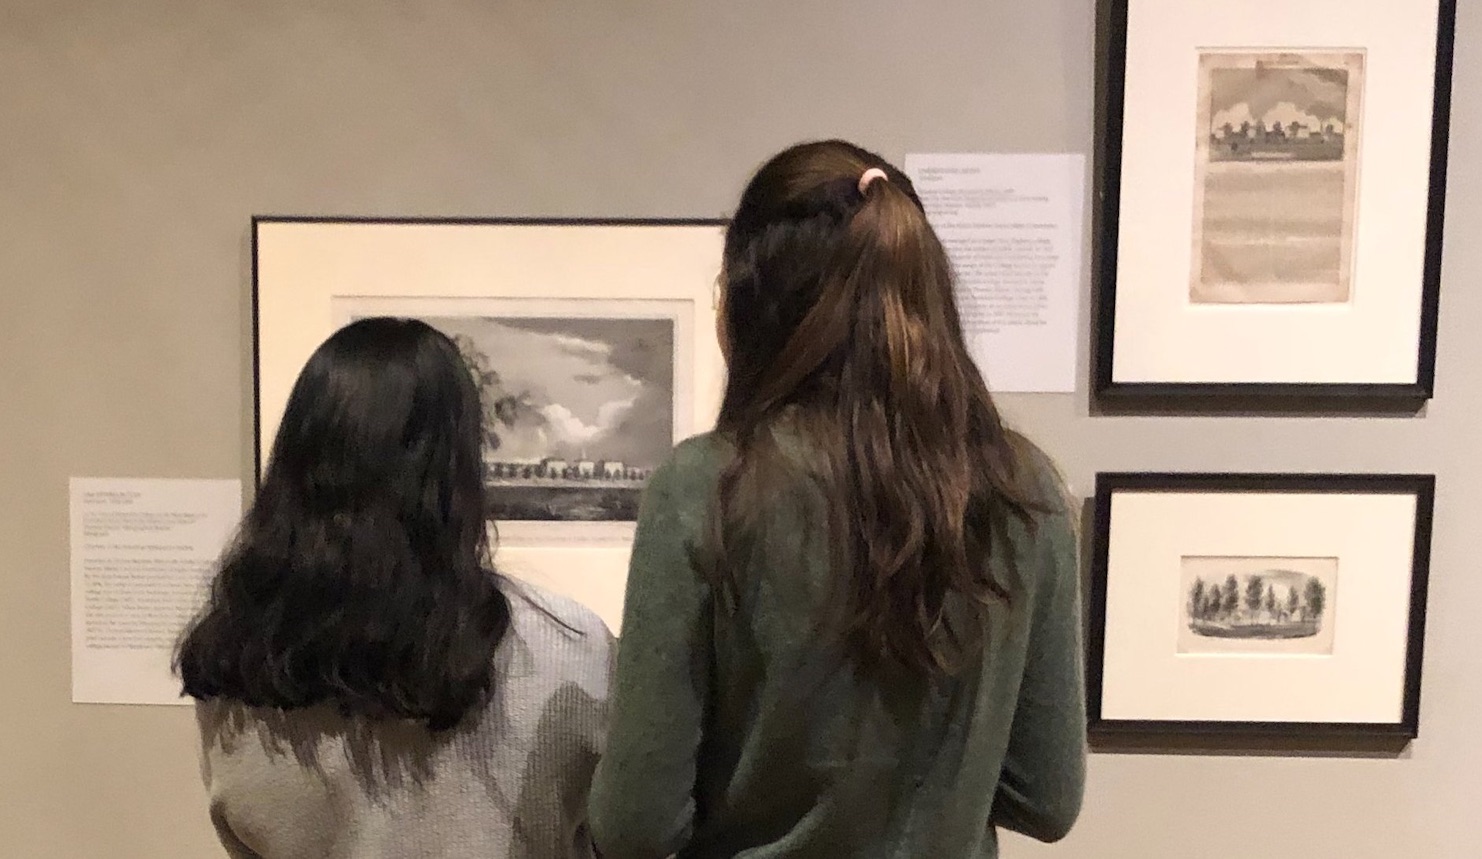 Two students viewing art in the Bowdoin College Museum of Art